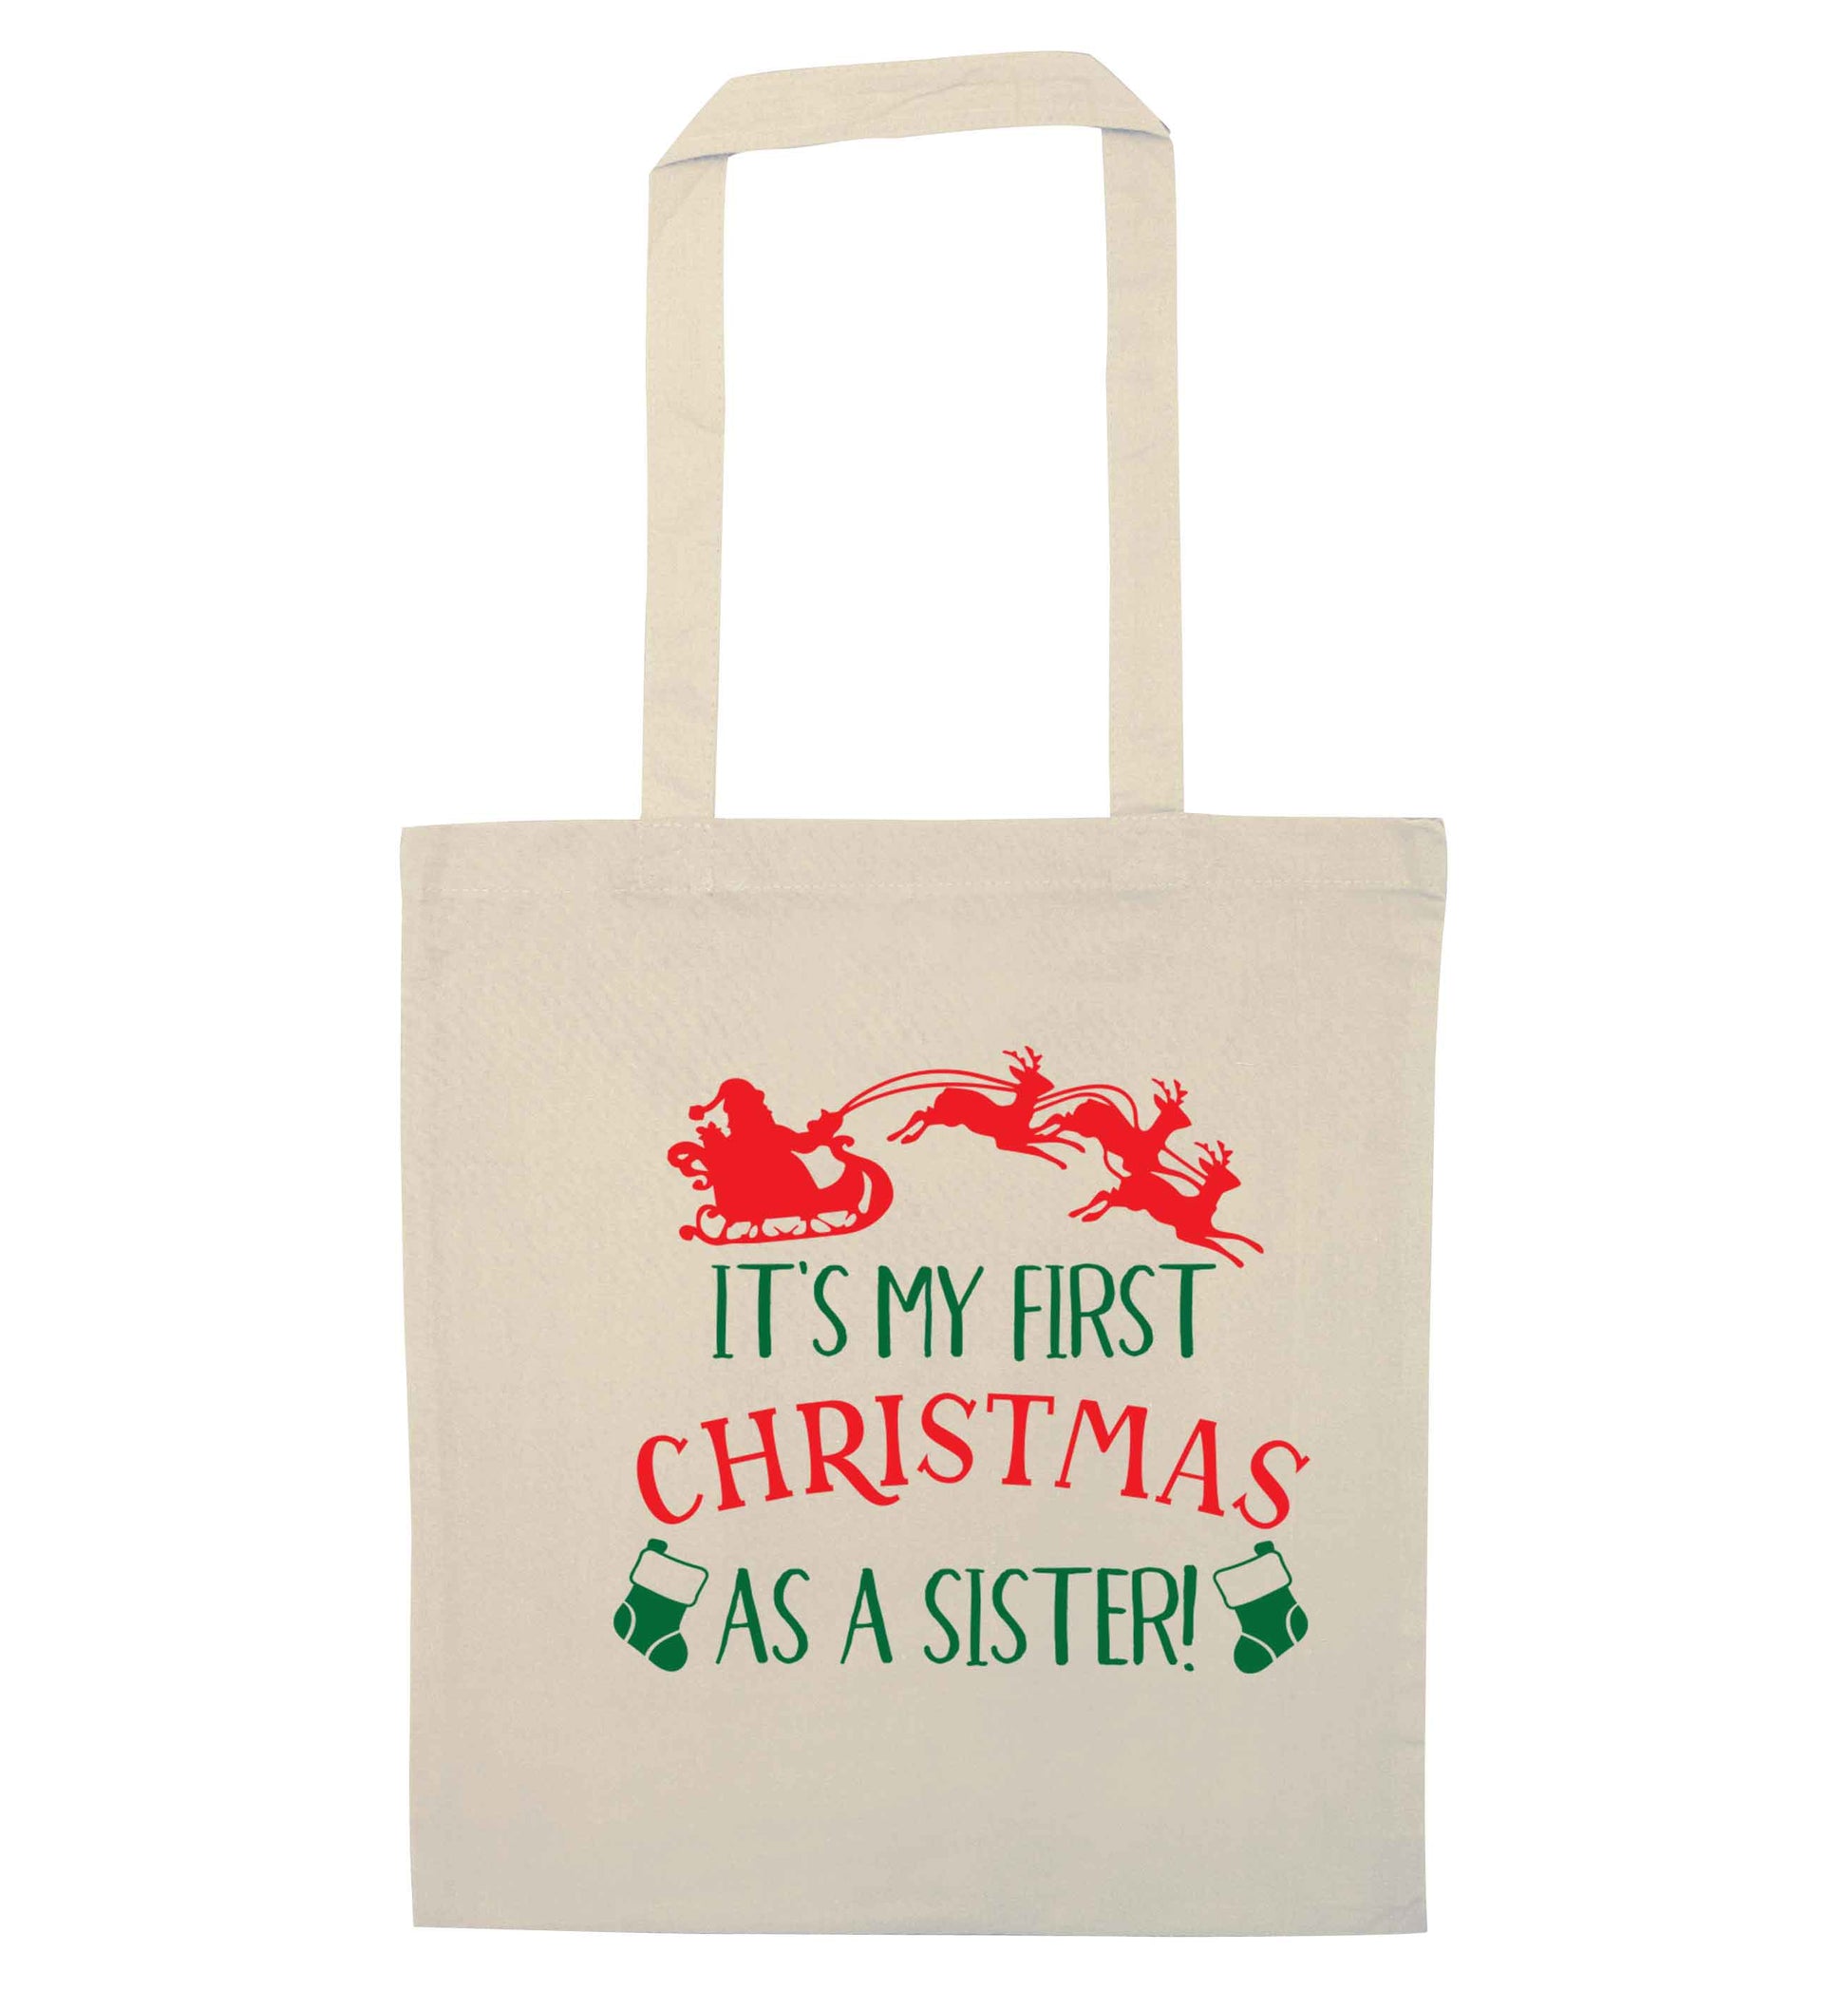 It's my first Christmas as a sister! natural tote bag